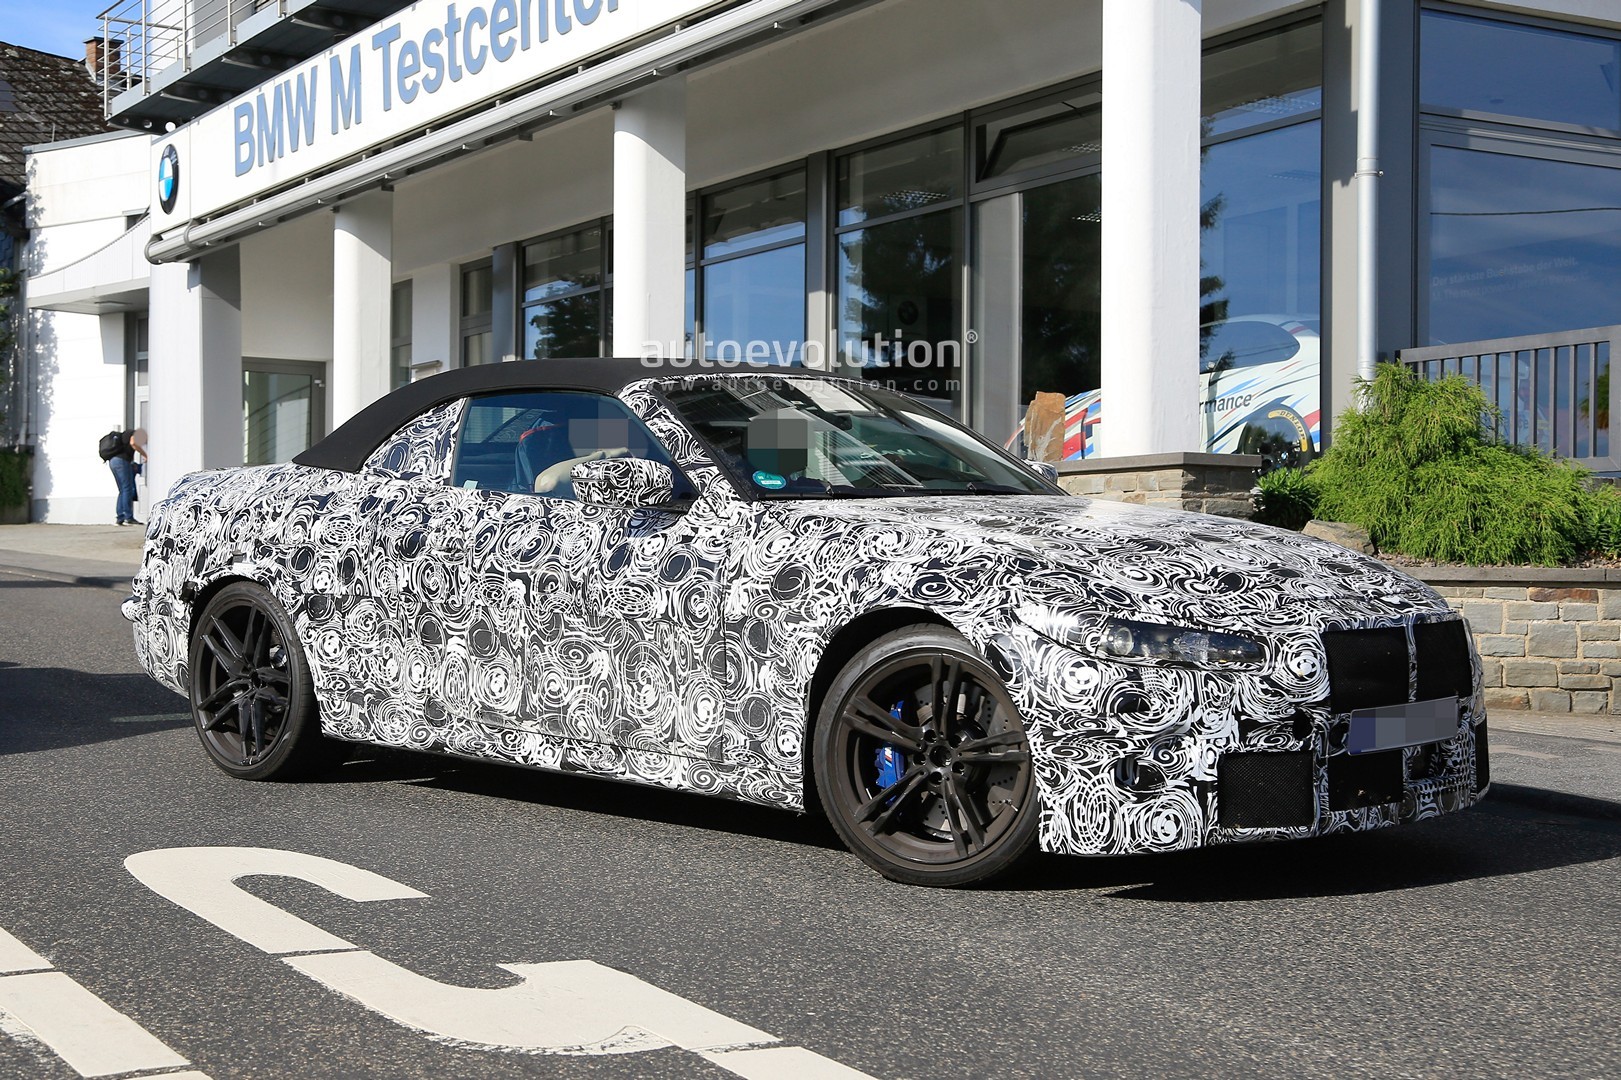 2021 BMW M4 Is a 510 HP Convertible in Latest Spyshots ...